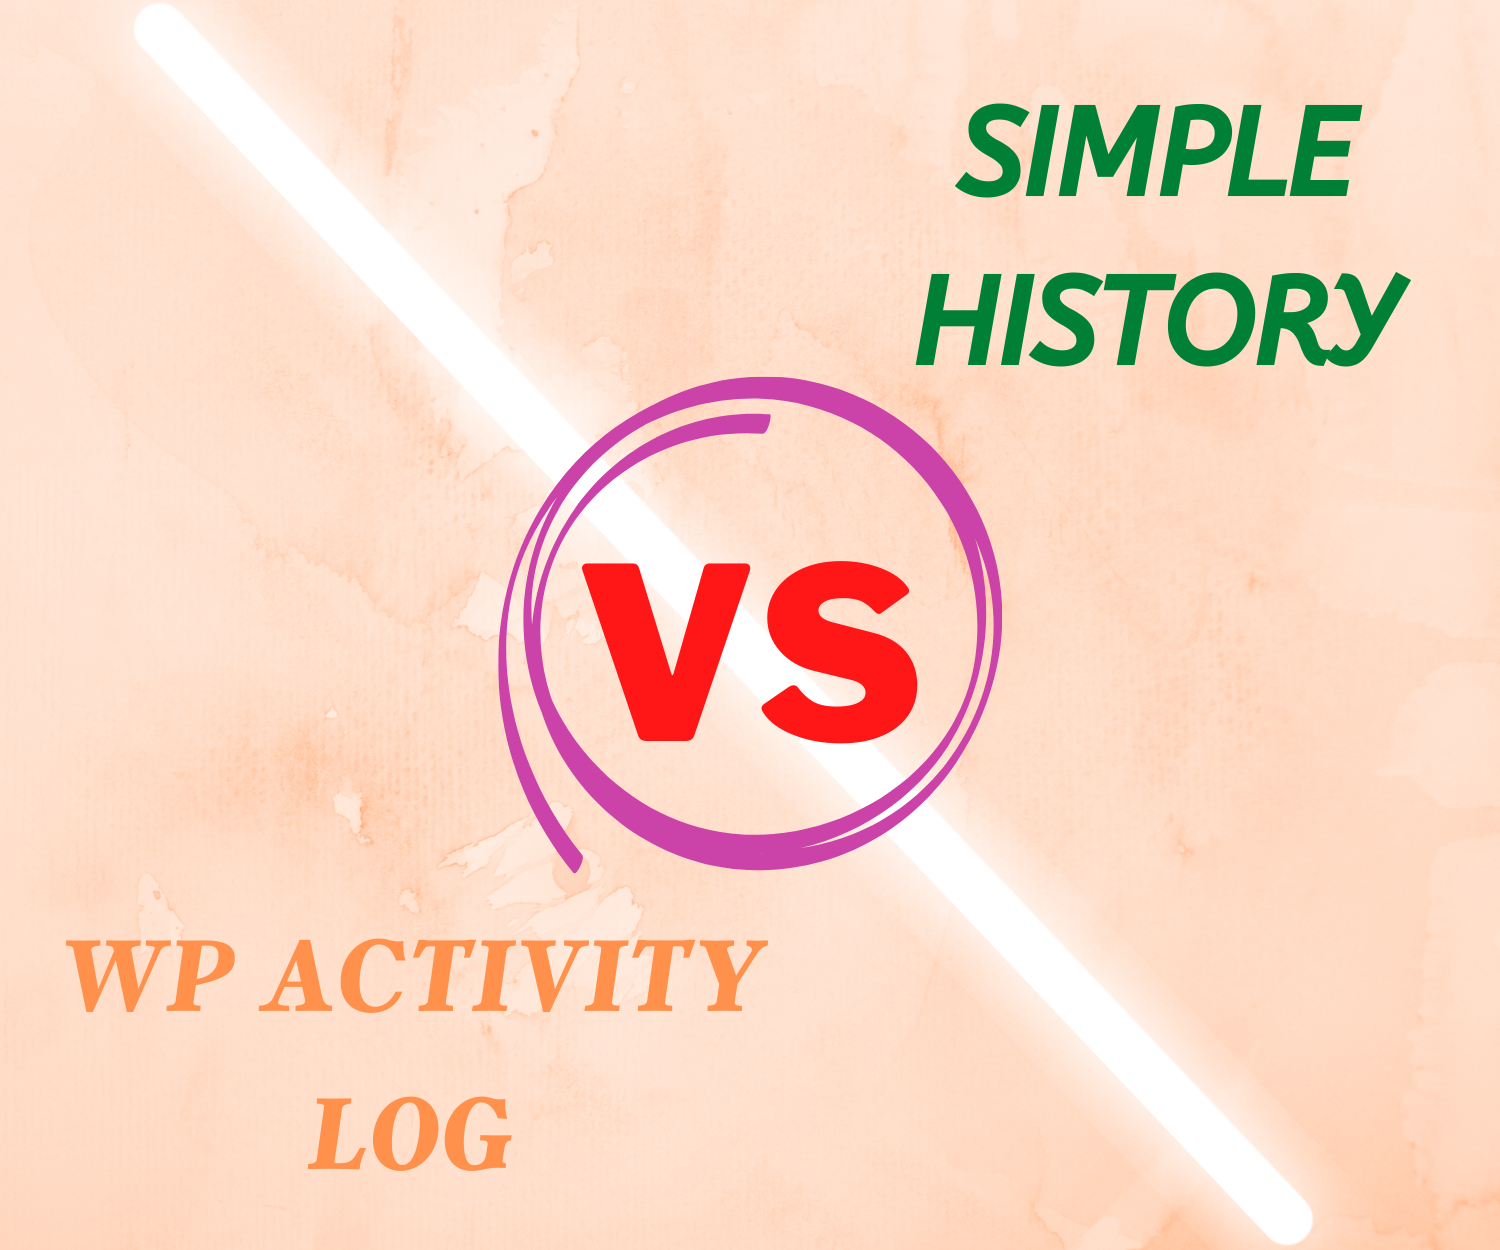 WP Activity Log Vs Simple History: Which one is better?